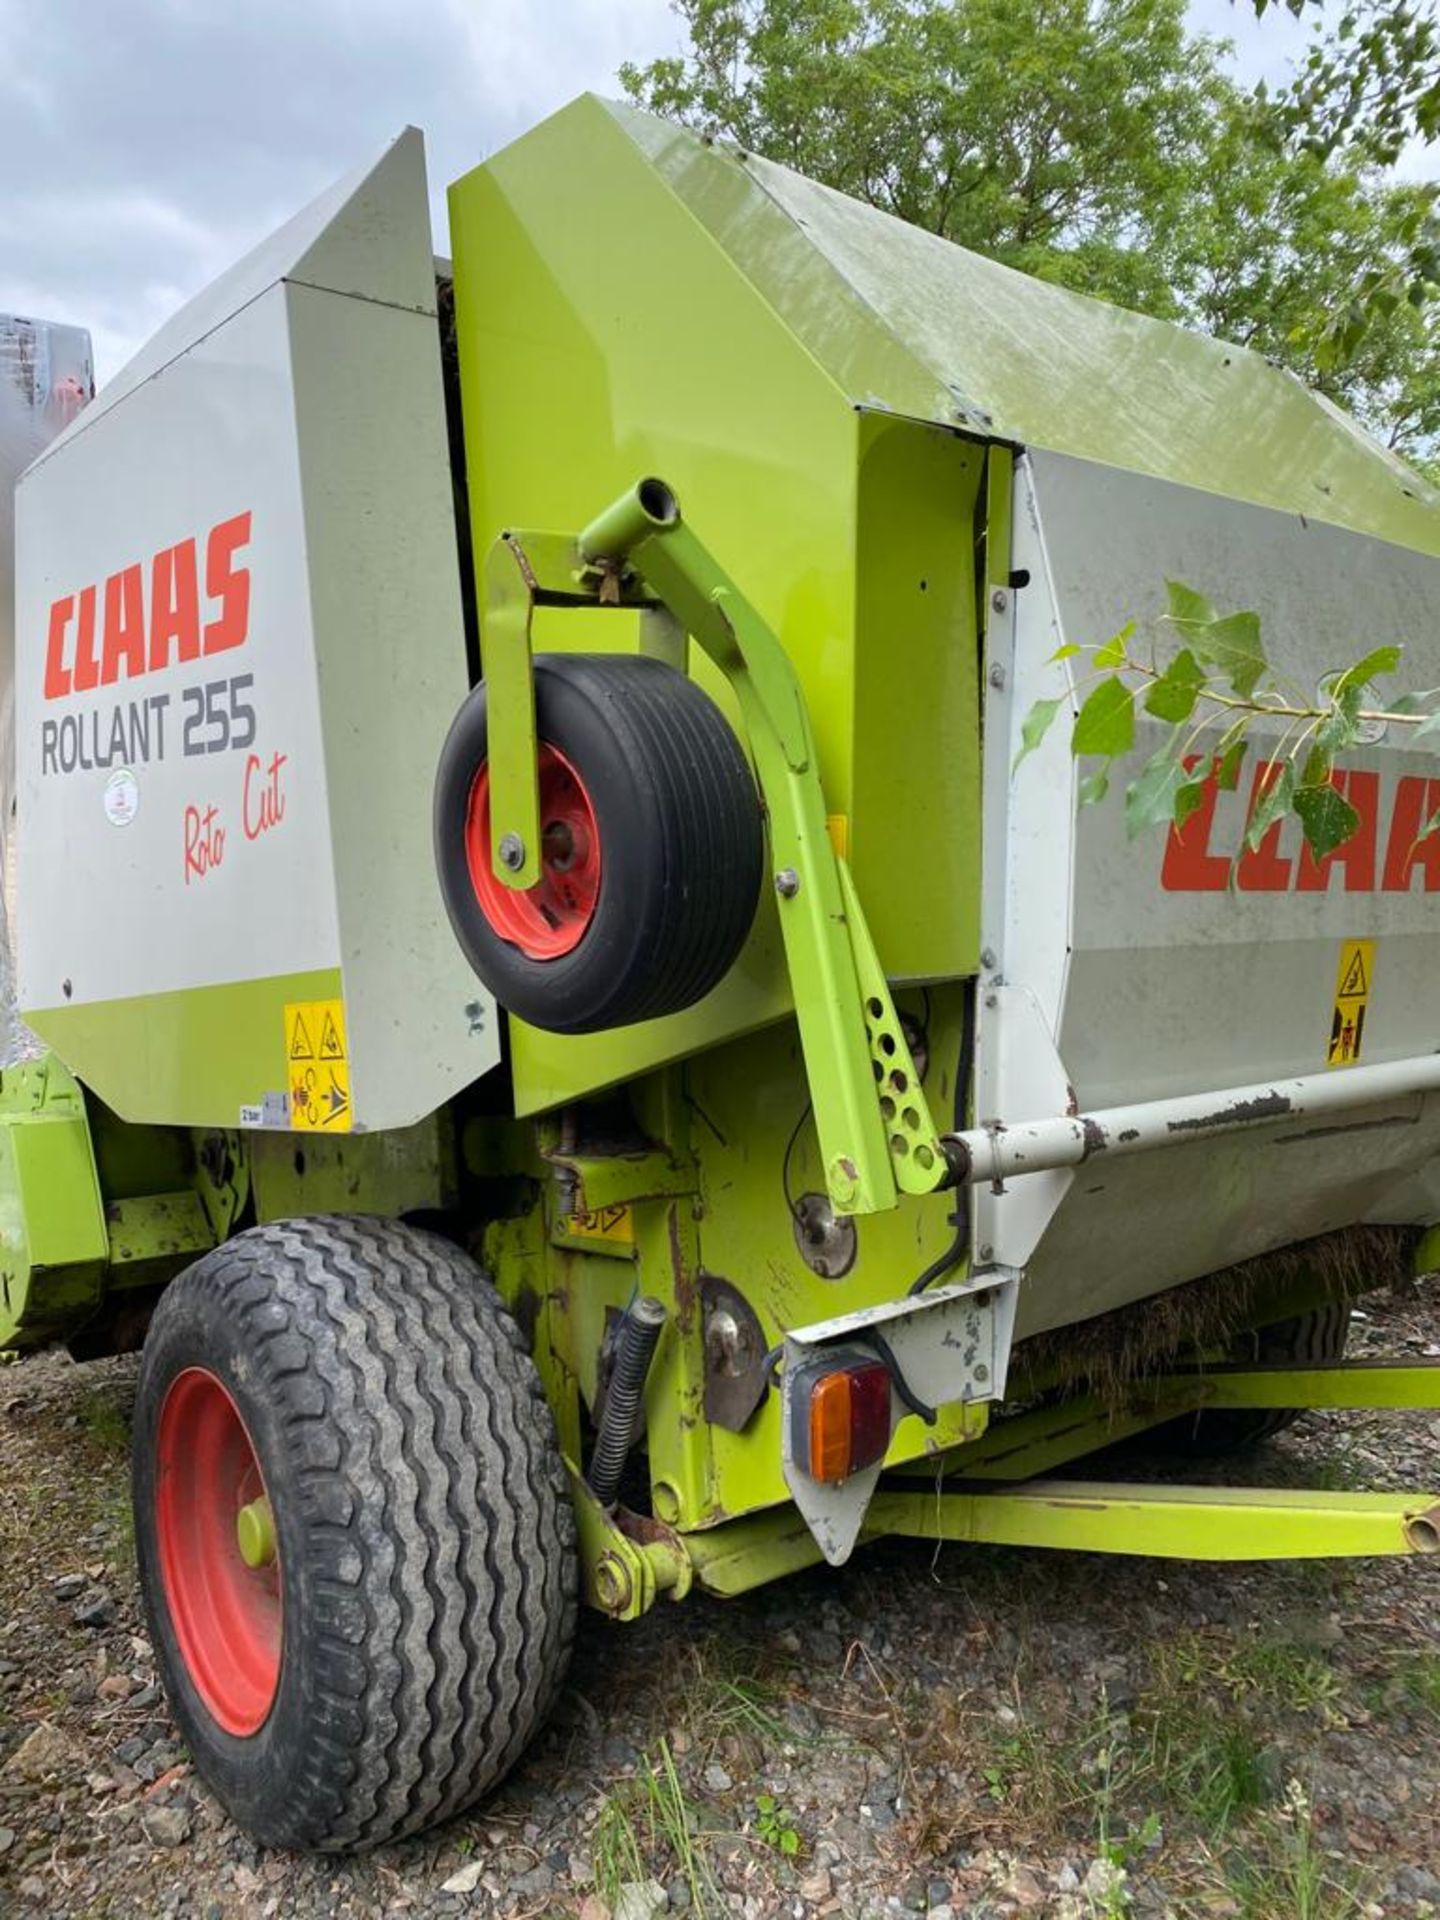 CLAAS ROLLANT 255 ROTO CUT ROUND BALER - Image 9 of 9